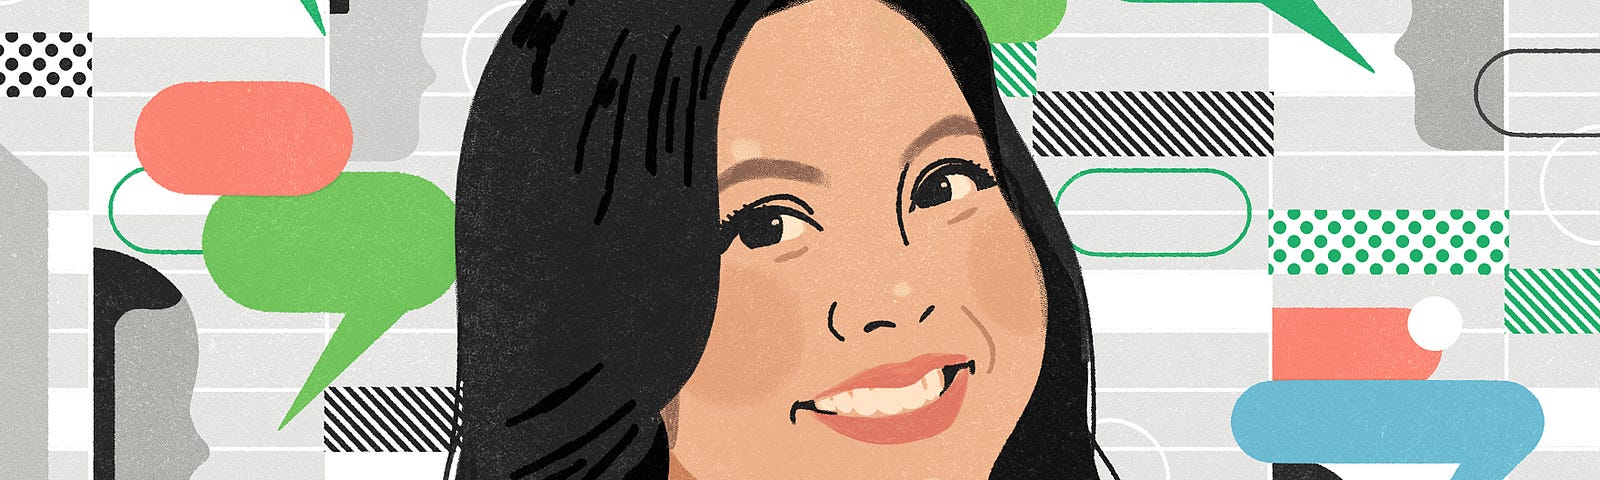 A digital illustration of an Asian woman with long dark hair and wearing a white blouse. She’s centered on a grey and white (spreadsheet-like) background, with randomly placed, grey-and-black stylized profiles of people, alongside speech bubbles in shades of green, peach, and blue.